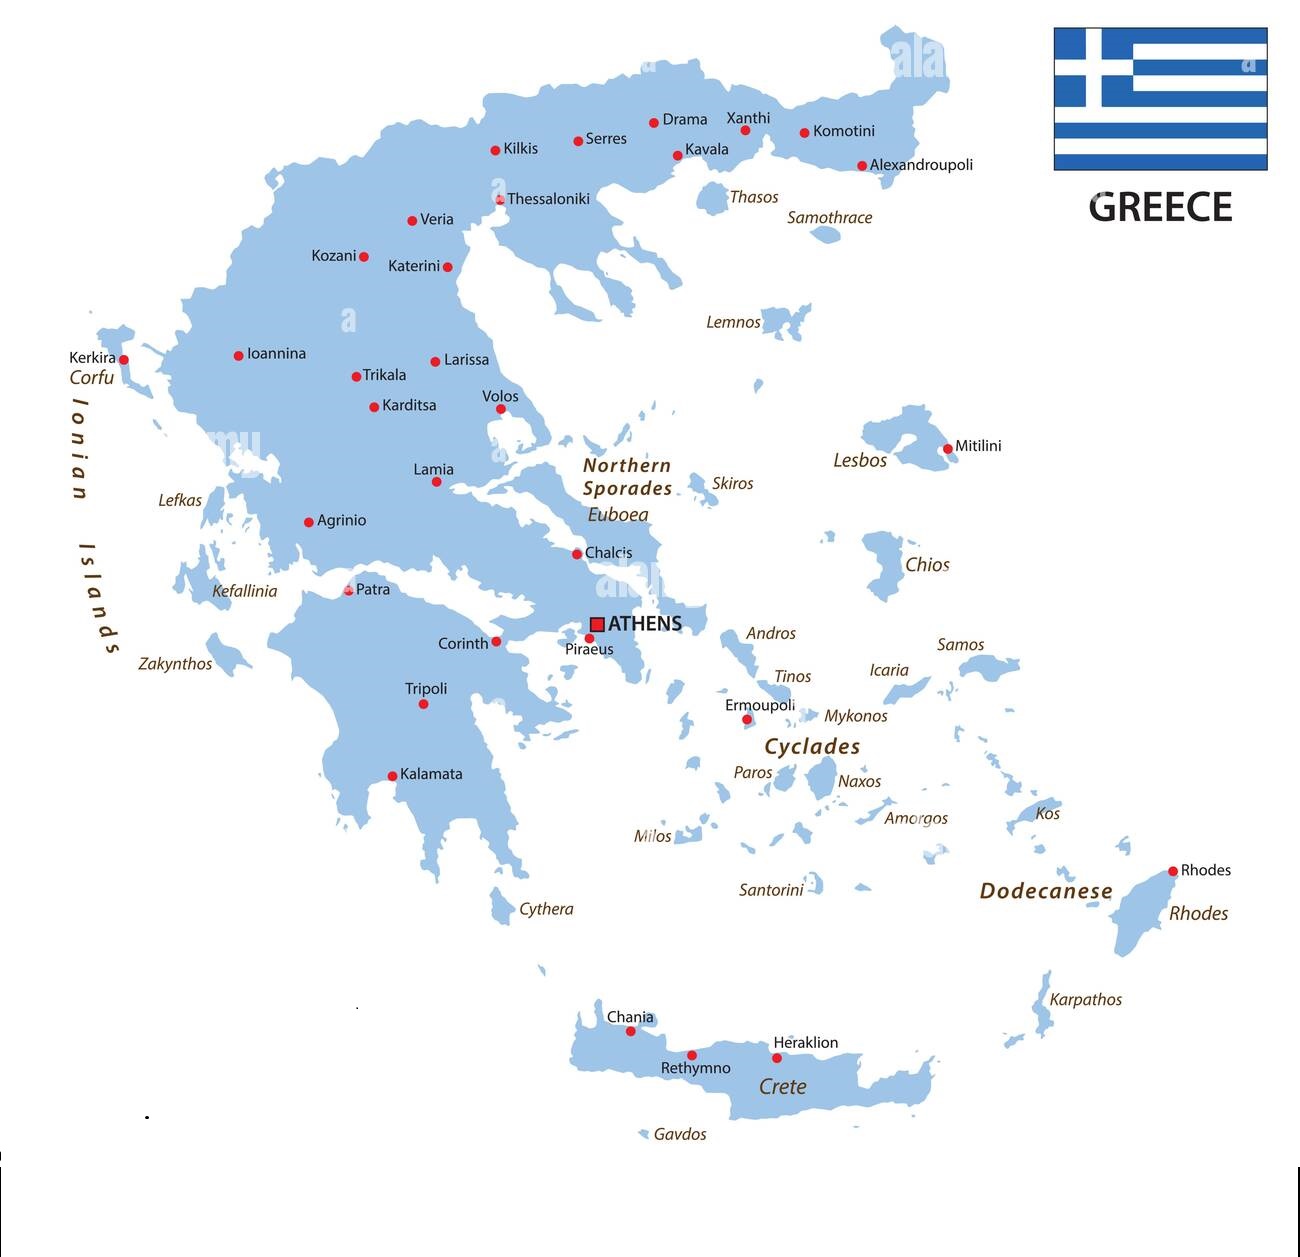 Lesbos on the map of Greece